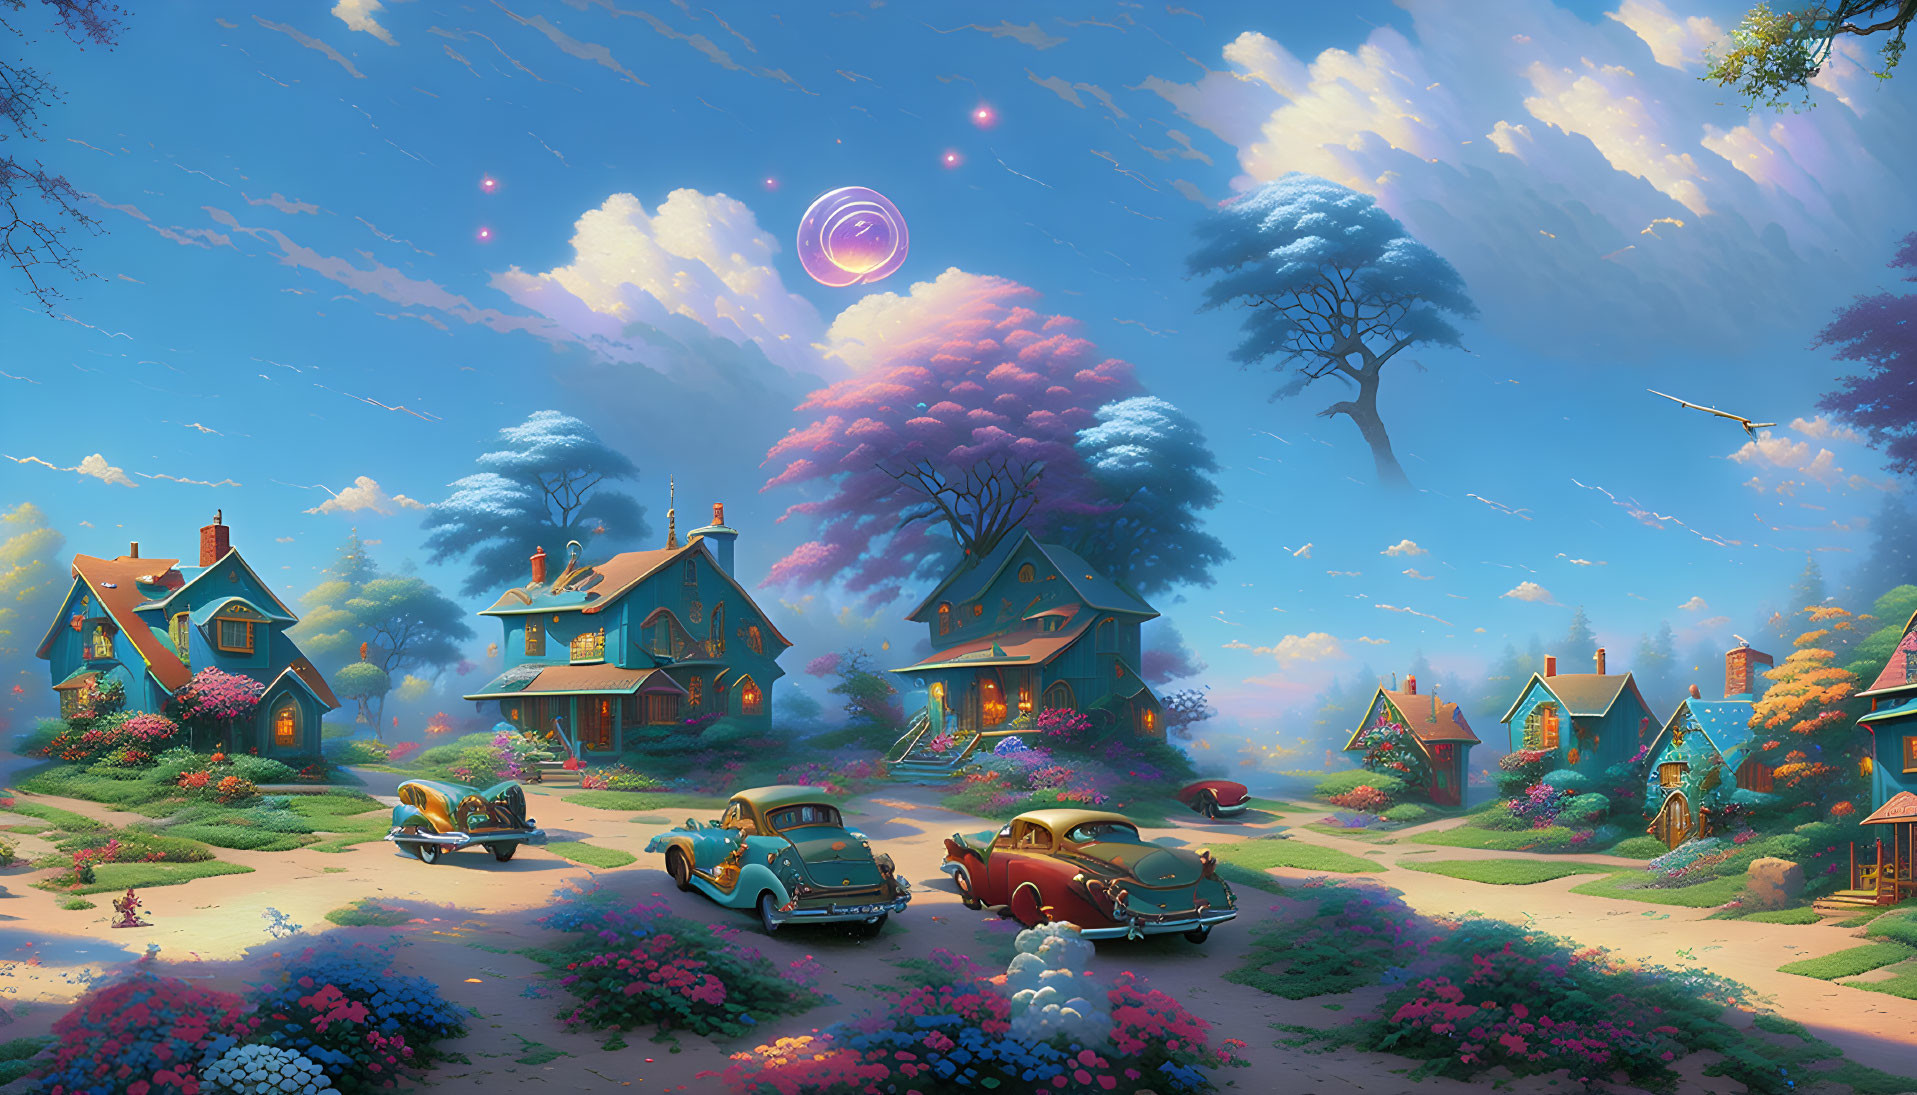 Colorful village scene with vintage cars and celestial ring